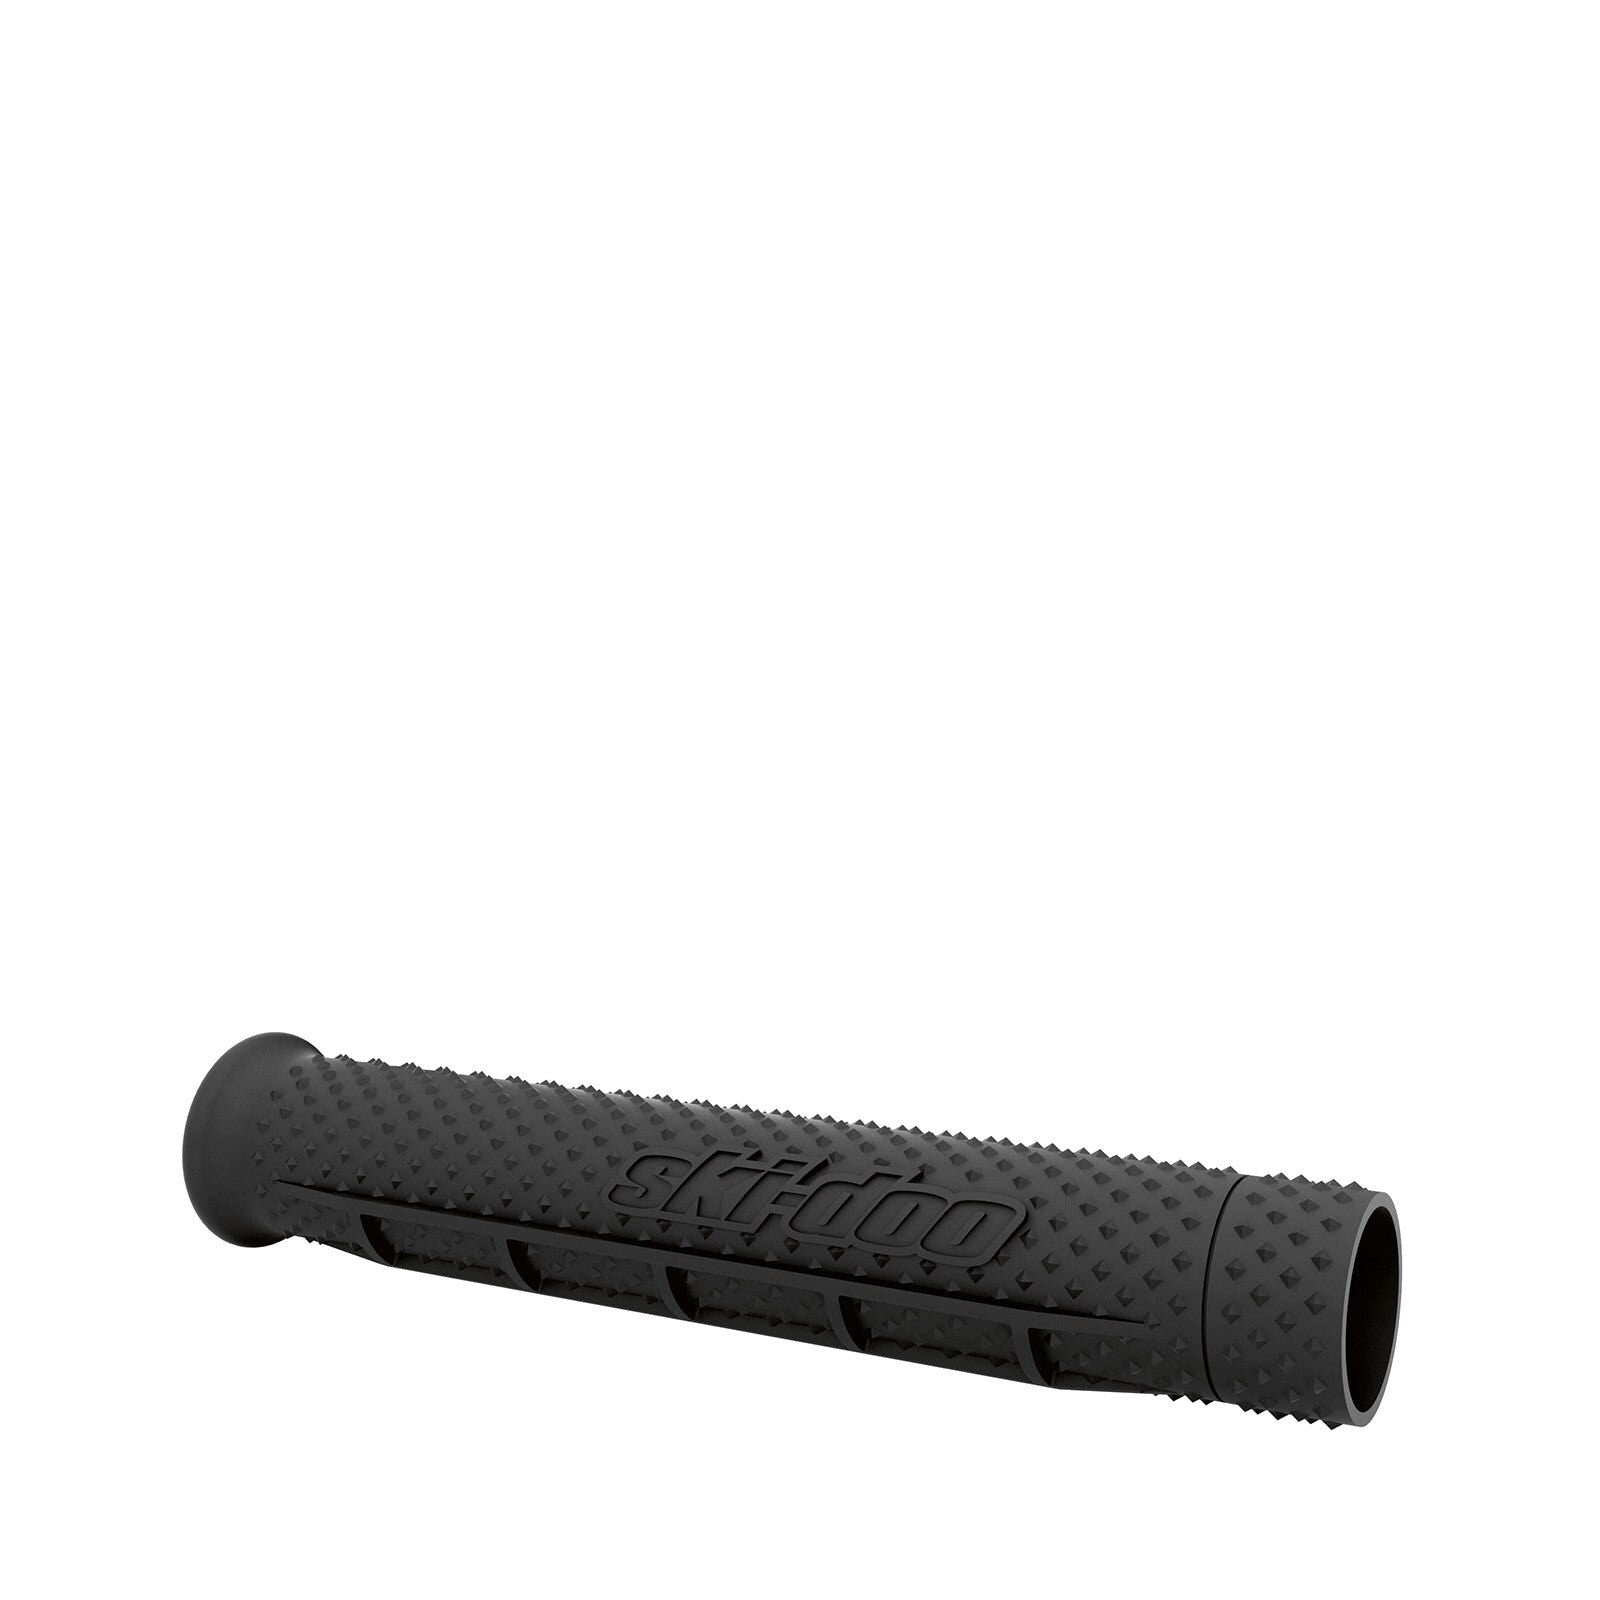 Trail Performance Grips - 860201802 - The Parts Lodge